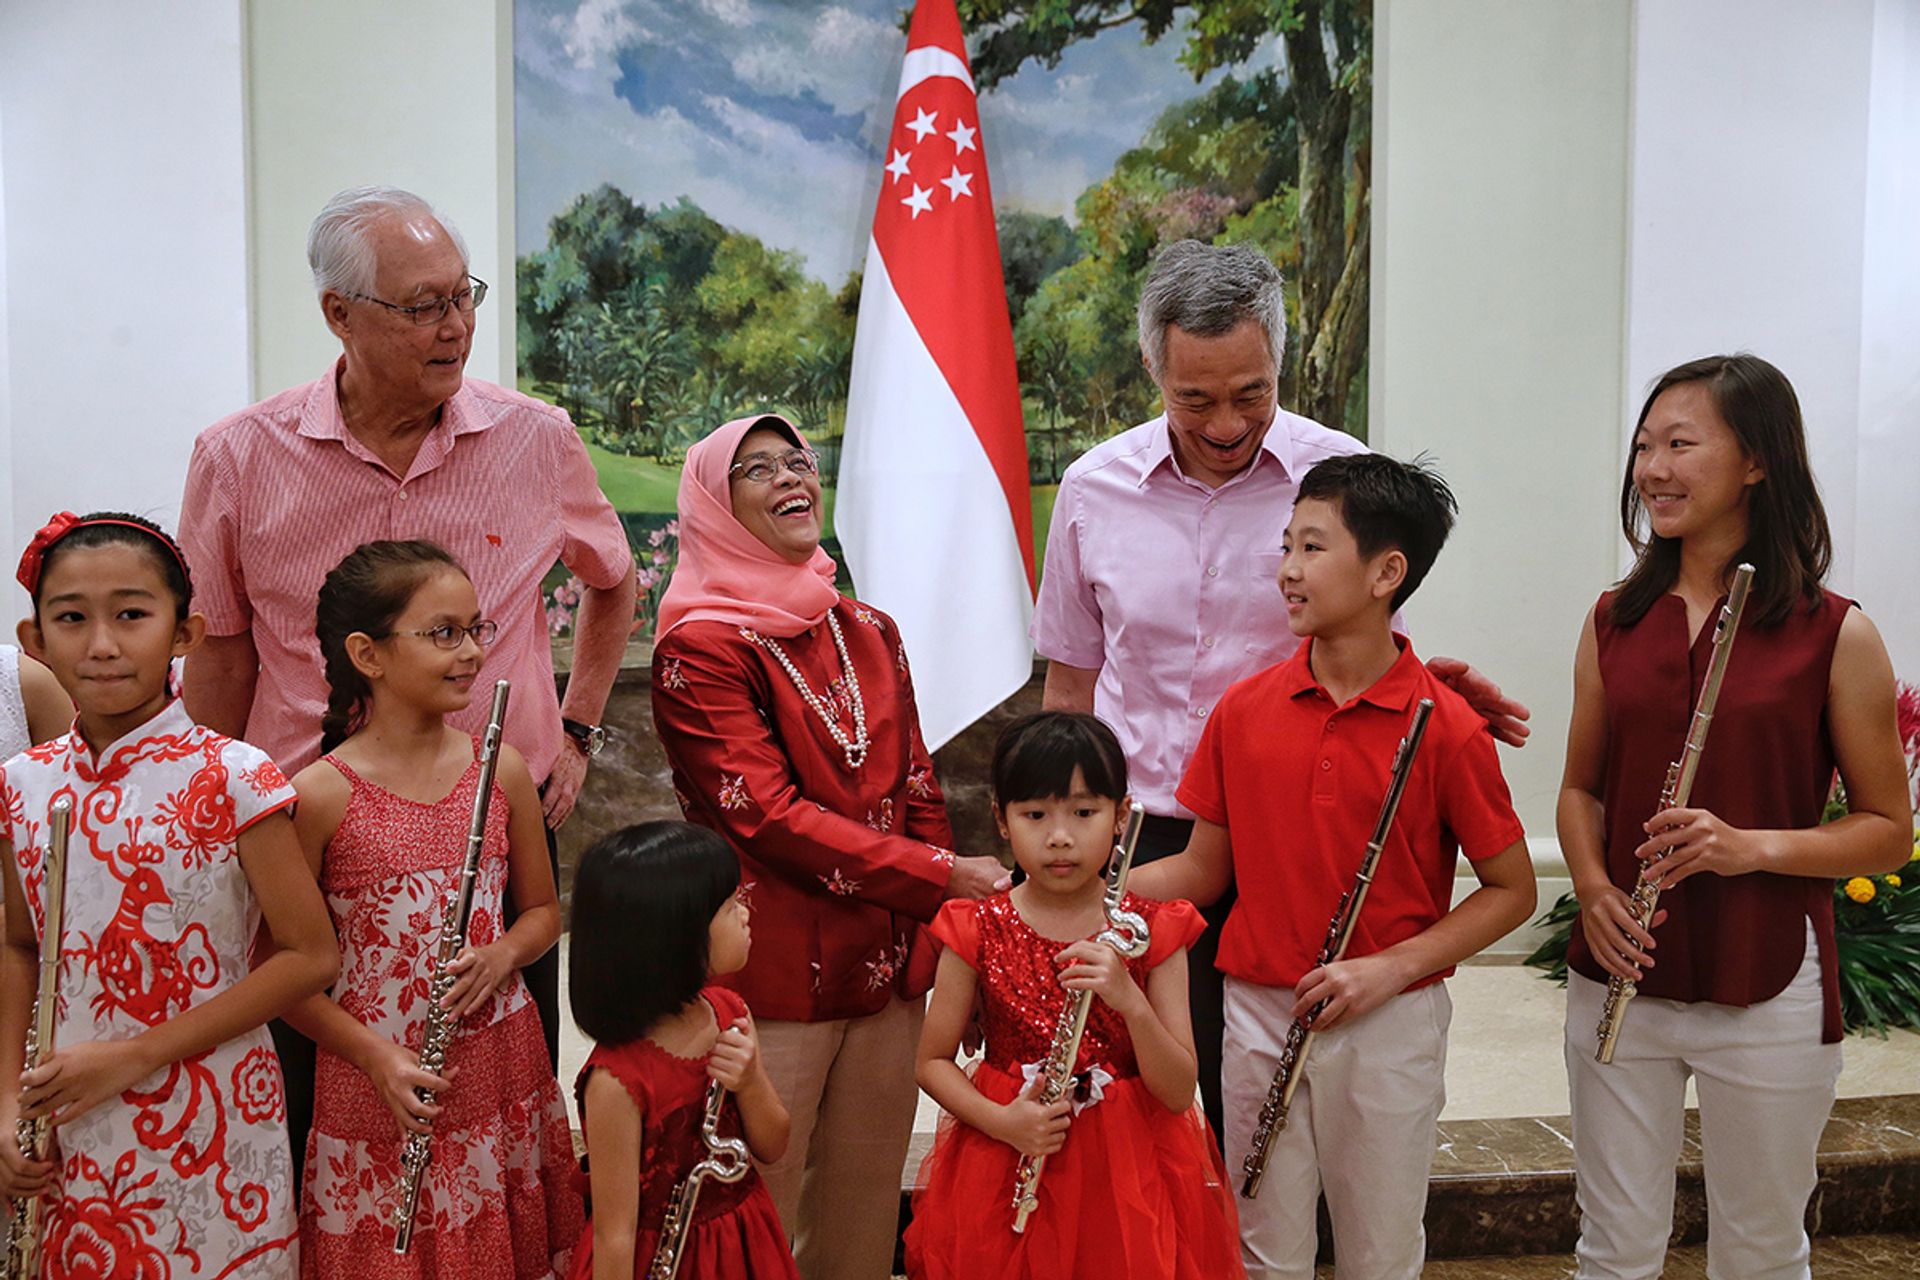 Emeritus Senior Minister Goh Chok Tong, President Halimah and Prime Minister Lee Hsien Loong sharing a light moment with young musicians (from left) Renee Koh, Nadia Chan, Beverley Ng, Yew Jing Yun, Joshua Yip and Olivia Yip during the National Day Observance Ceremony at the Istana on Aug 8, 2018. ST PHOTO: KEVIN LIM